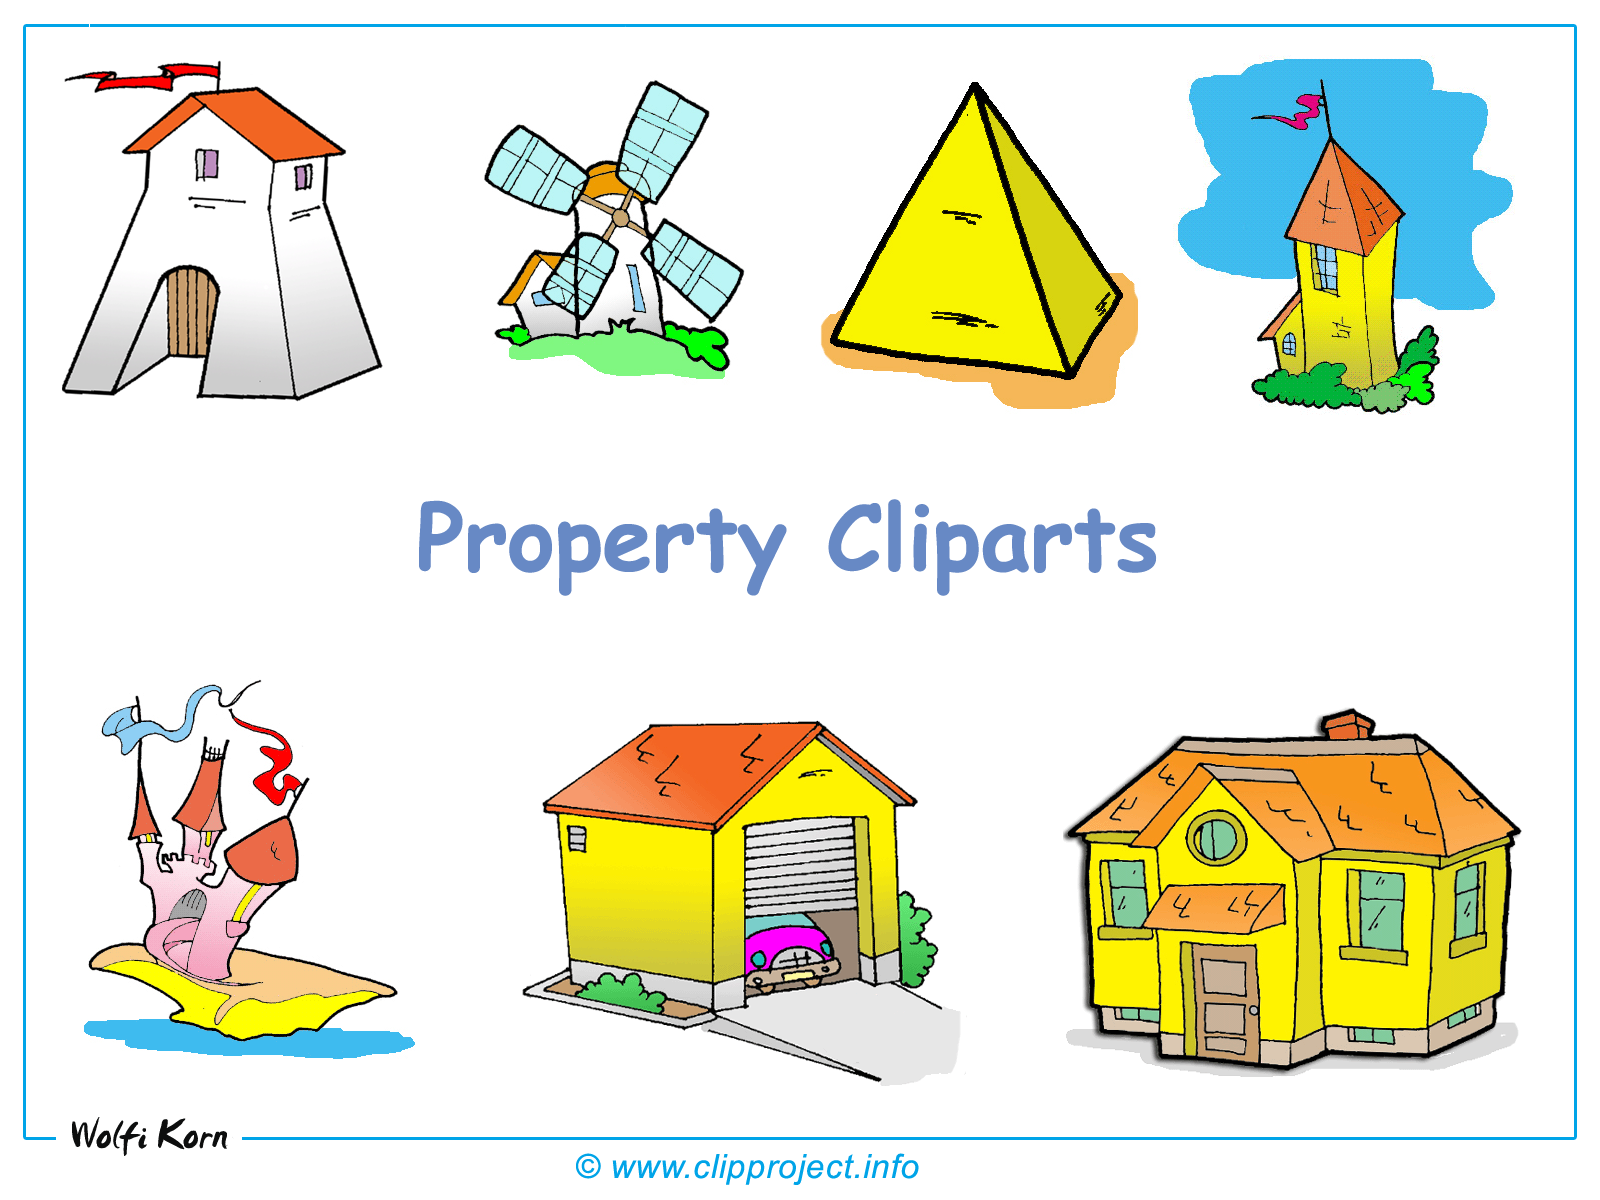 Clipart free download.